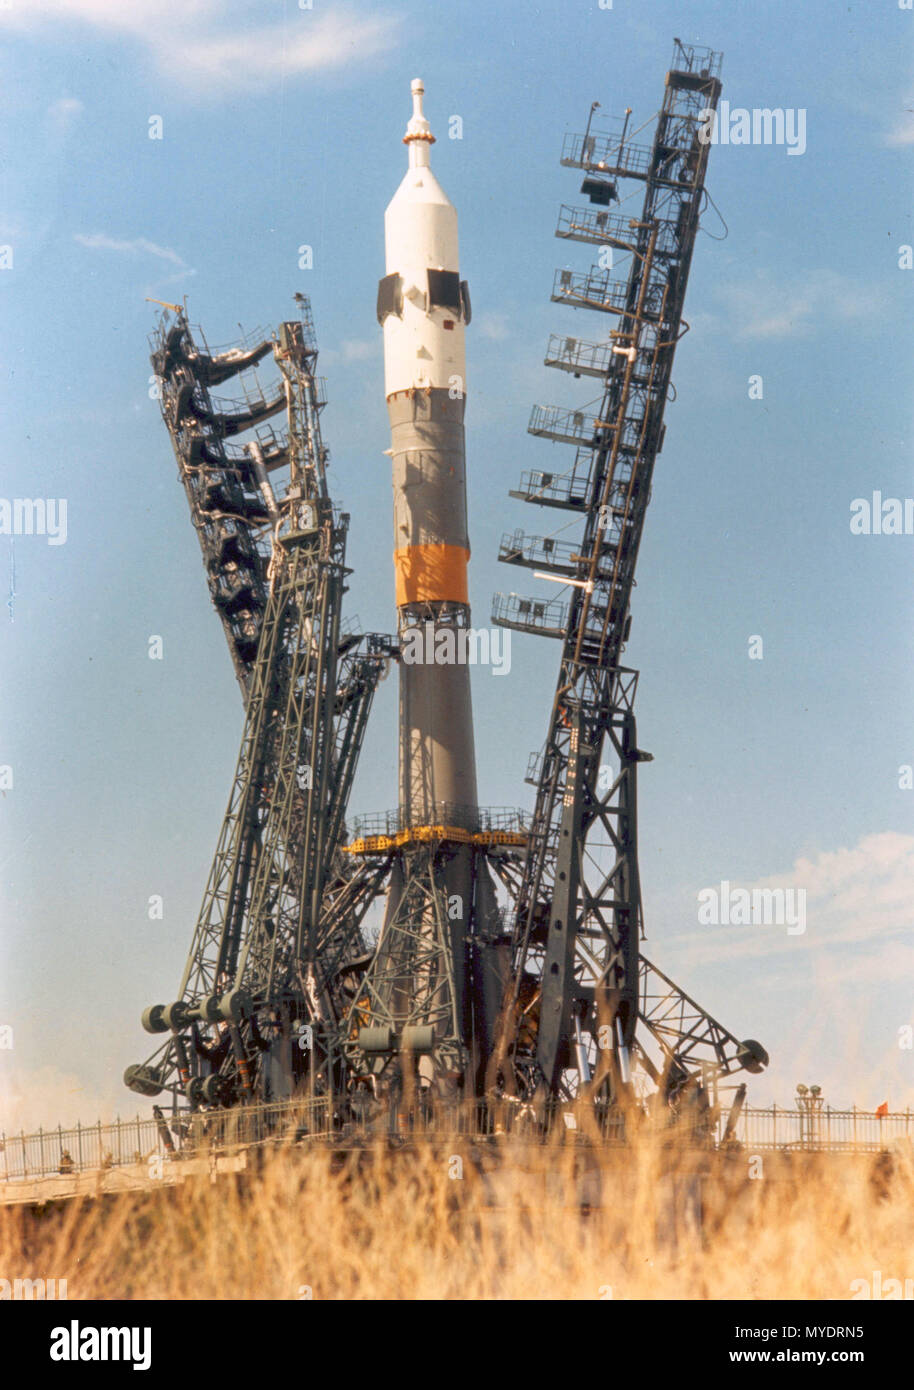 The Soyuz spacecraft and launch vehicle are installed on the launch pad at the Baikonur complex in Kazakhstan. Baikonur is the world's largest space center. This launch was part of the Apollo-Soyuz Test Project (ASTP), a cooperative space mission between the United States and the USSR. Stock Photo